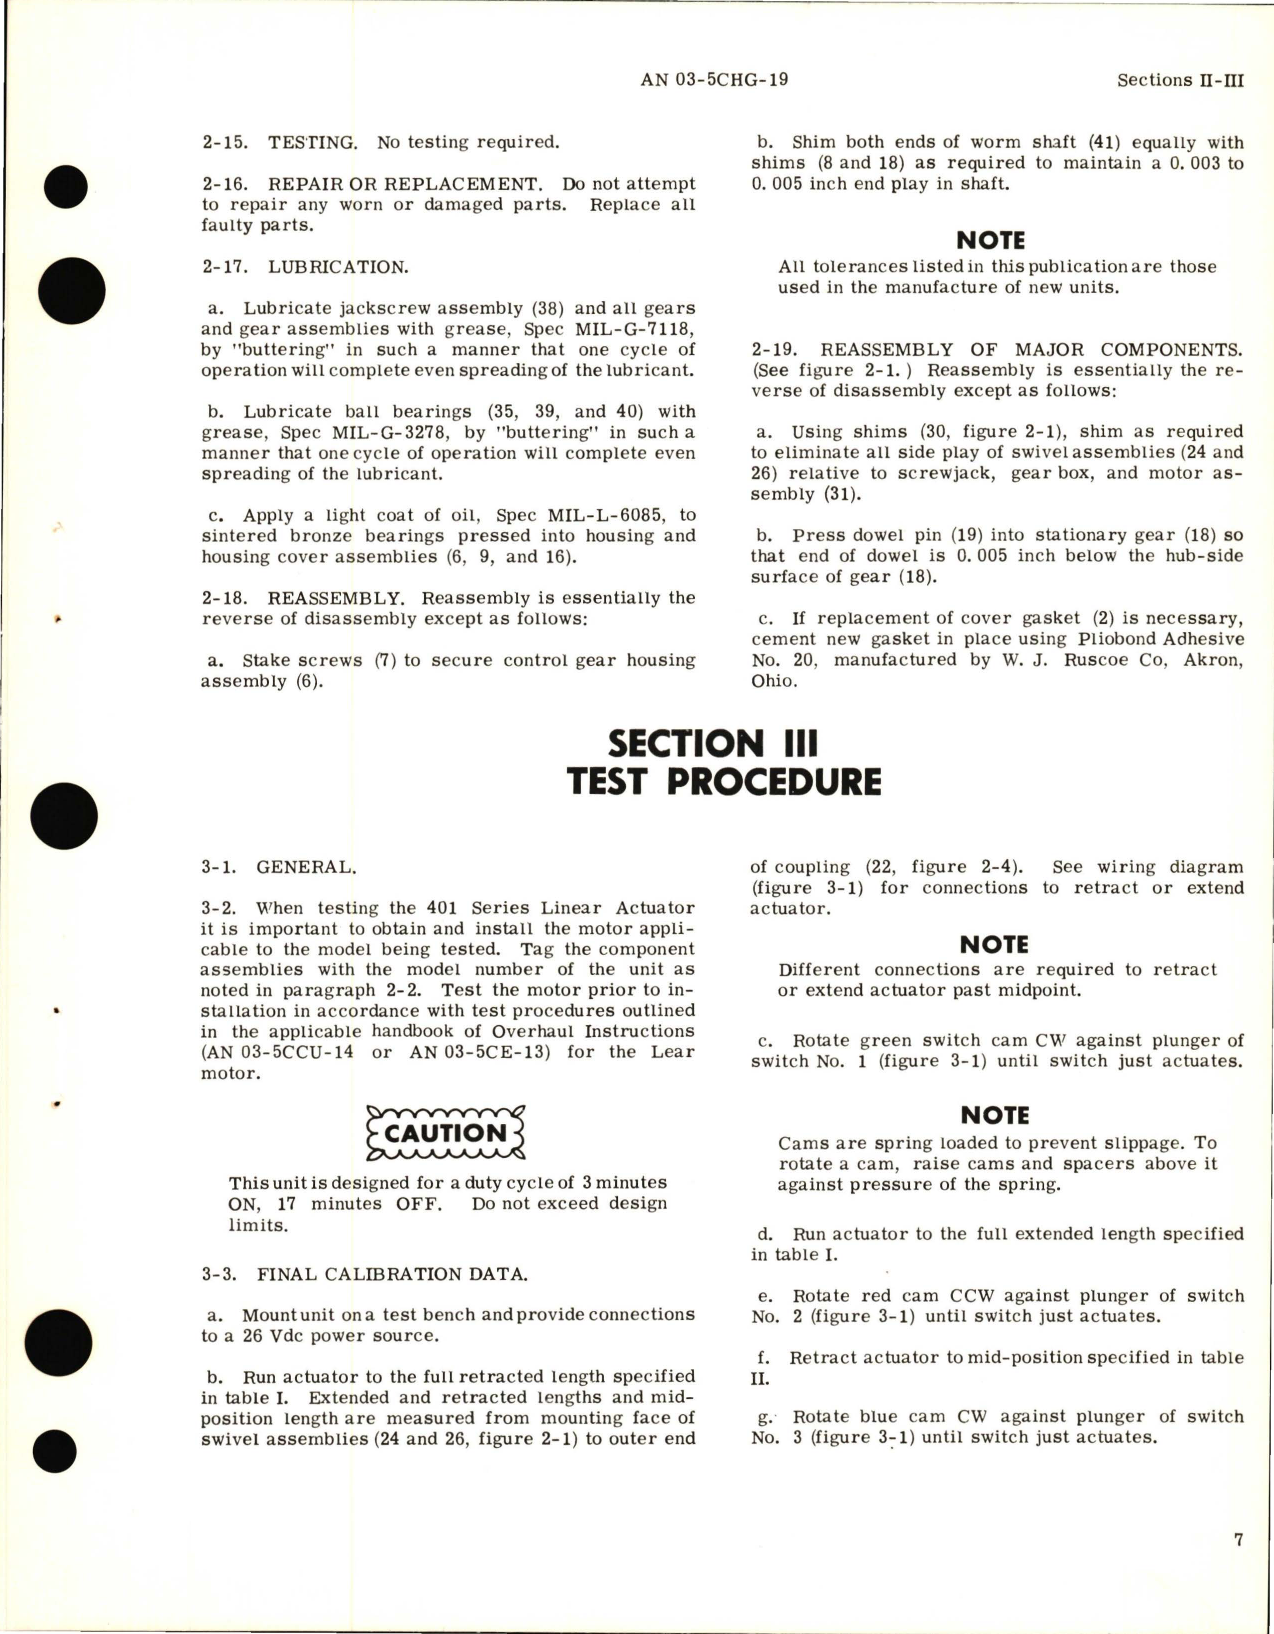 Sample page 9 from AirCorps Library document: Overhaul Instructions for Lear Linear Actuator Assembly 401